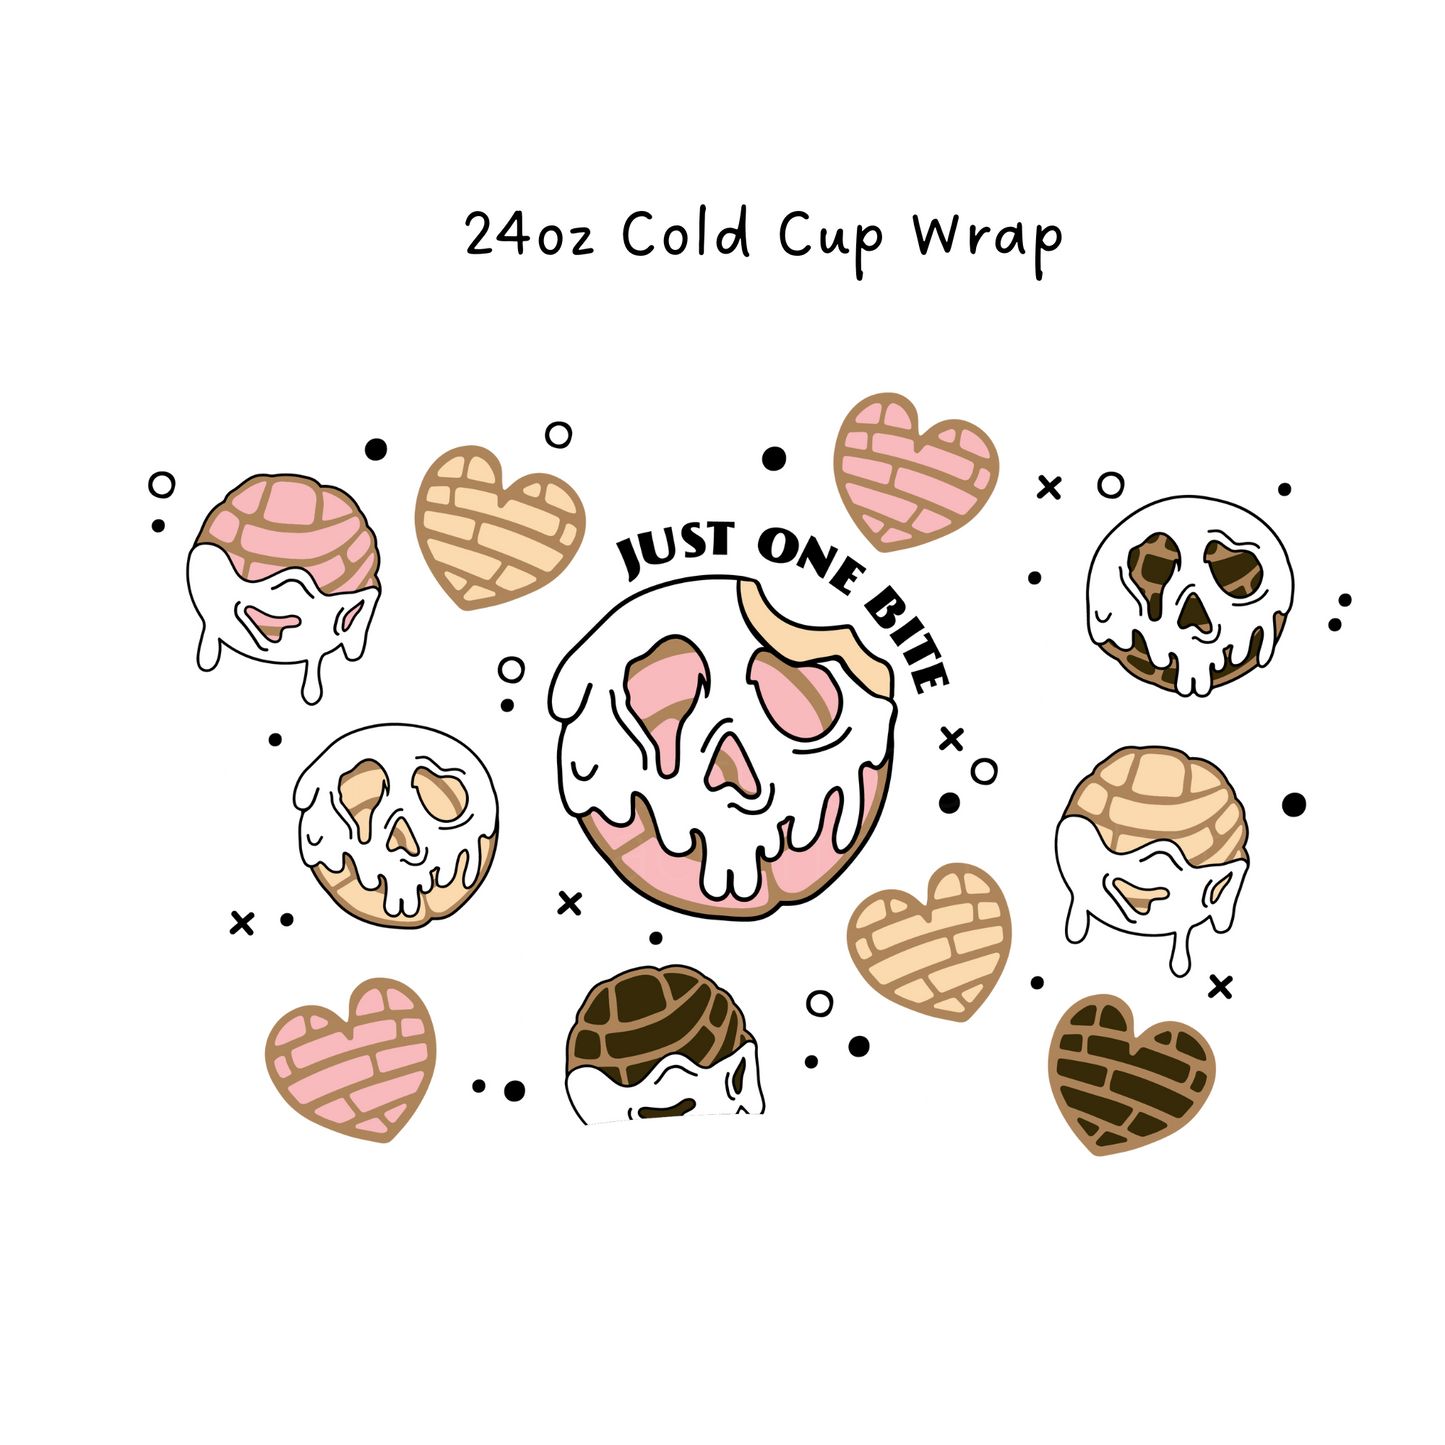 Just One Bite 24 OZ Cold Cup Wrap